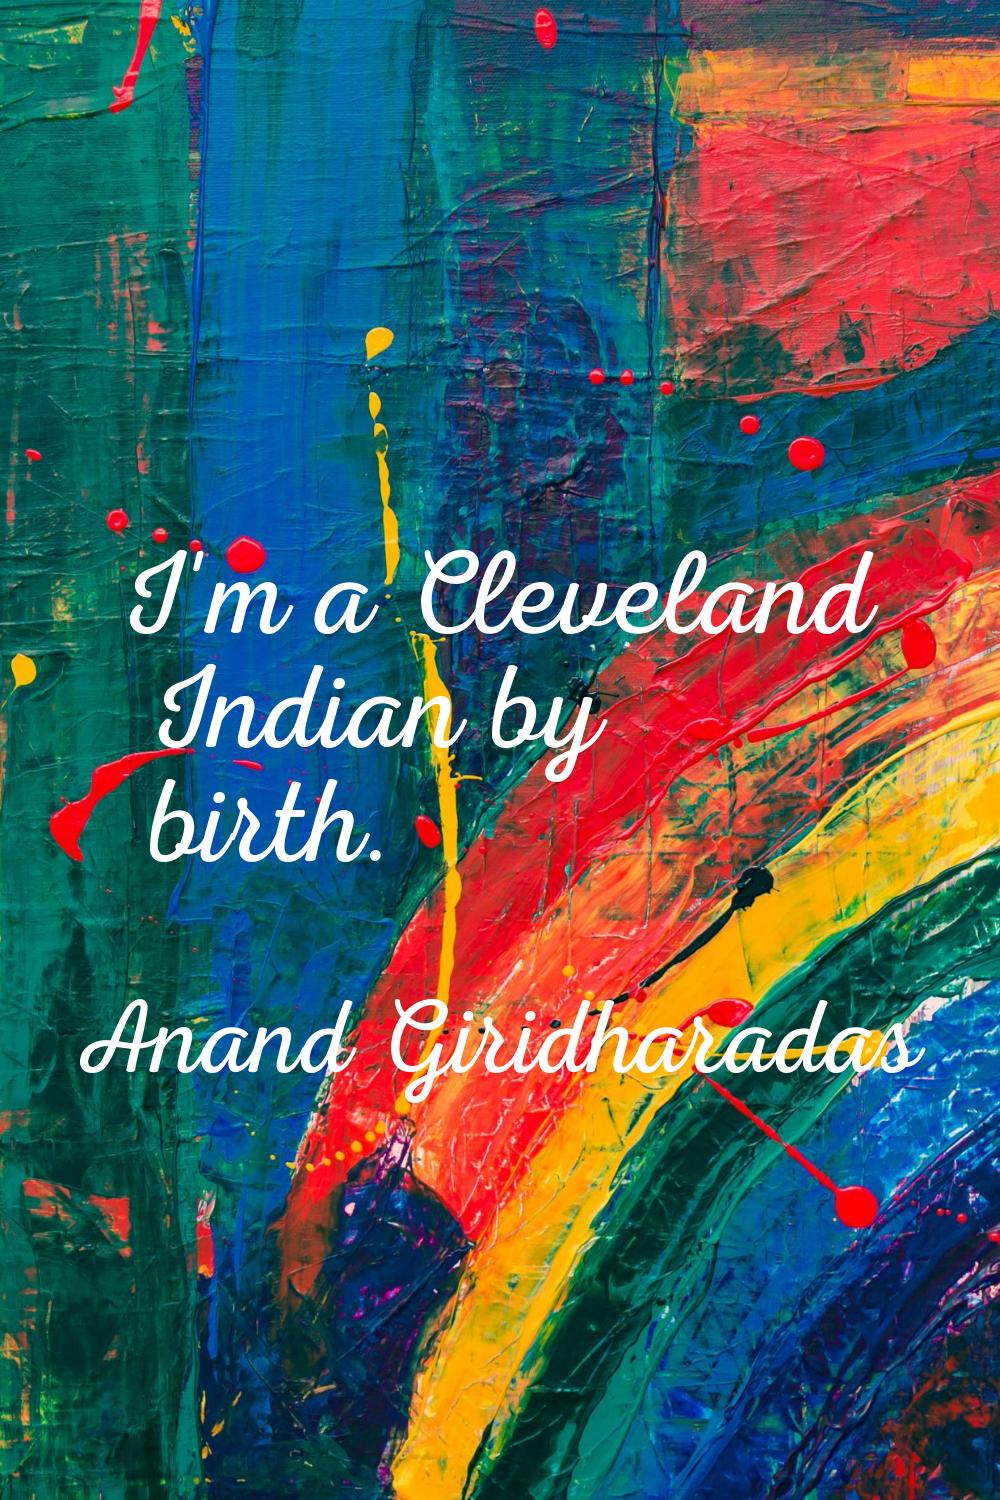 I'm a Cleveland Indian by birth.